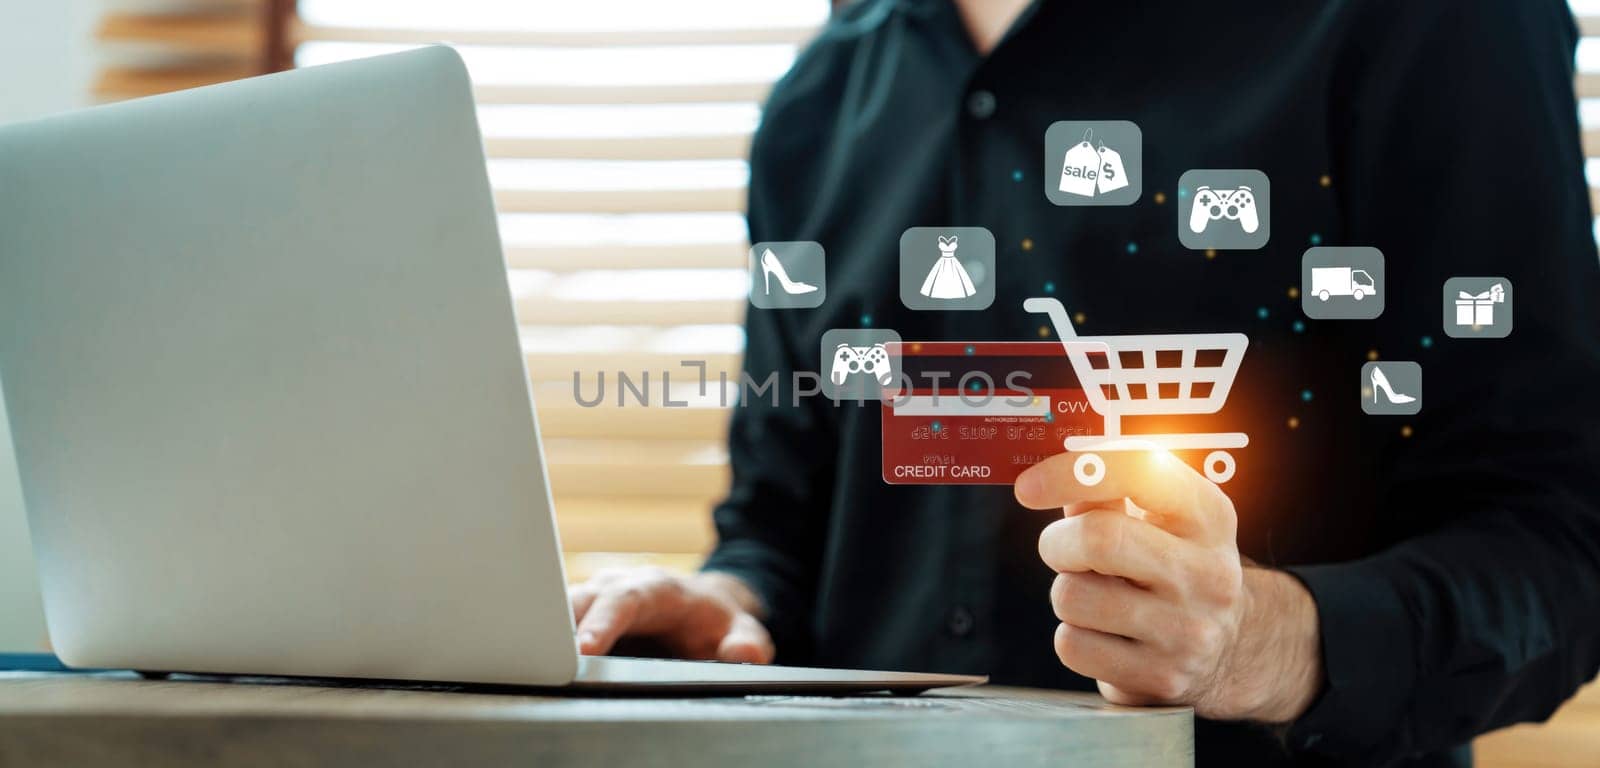 Smart customer open online store use credit card for online shopping. Cybercash. by biancoblue